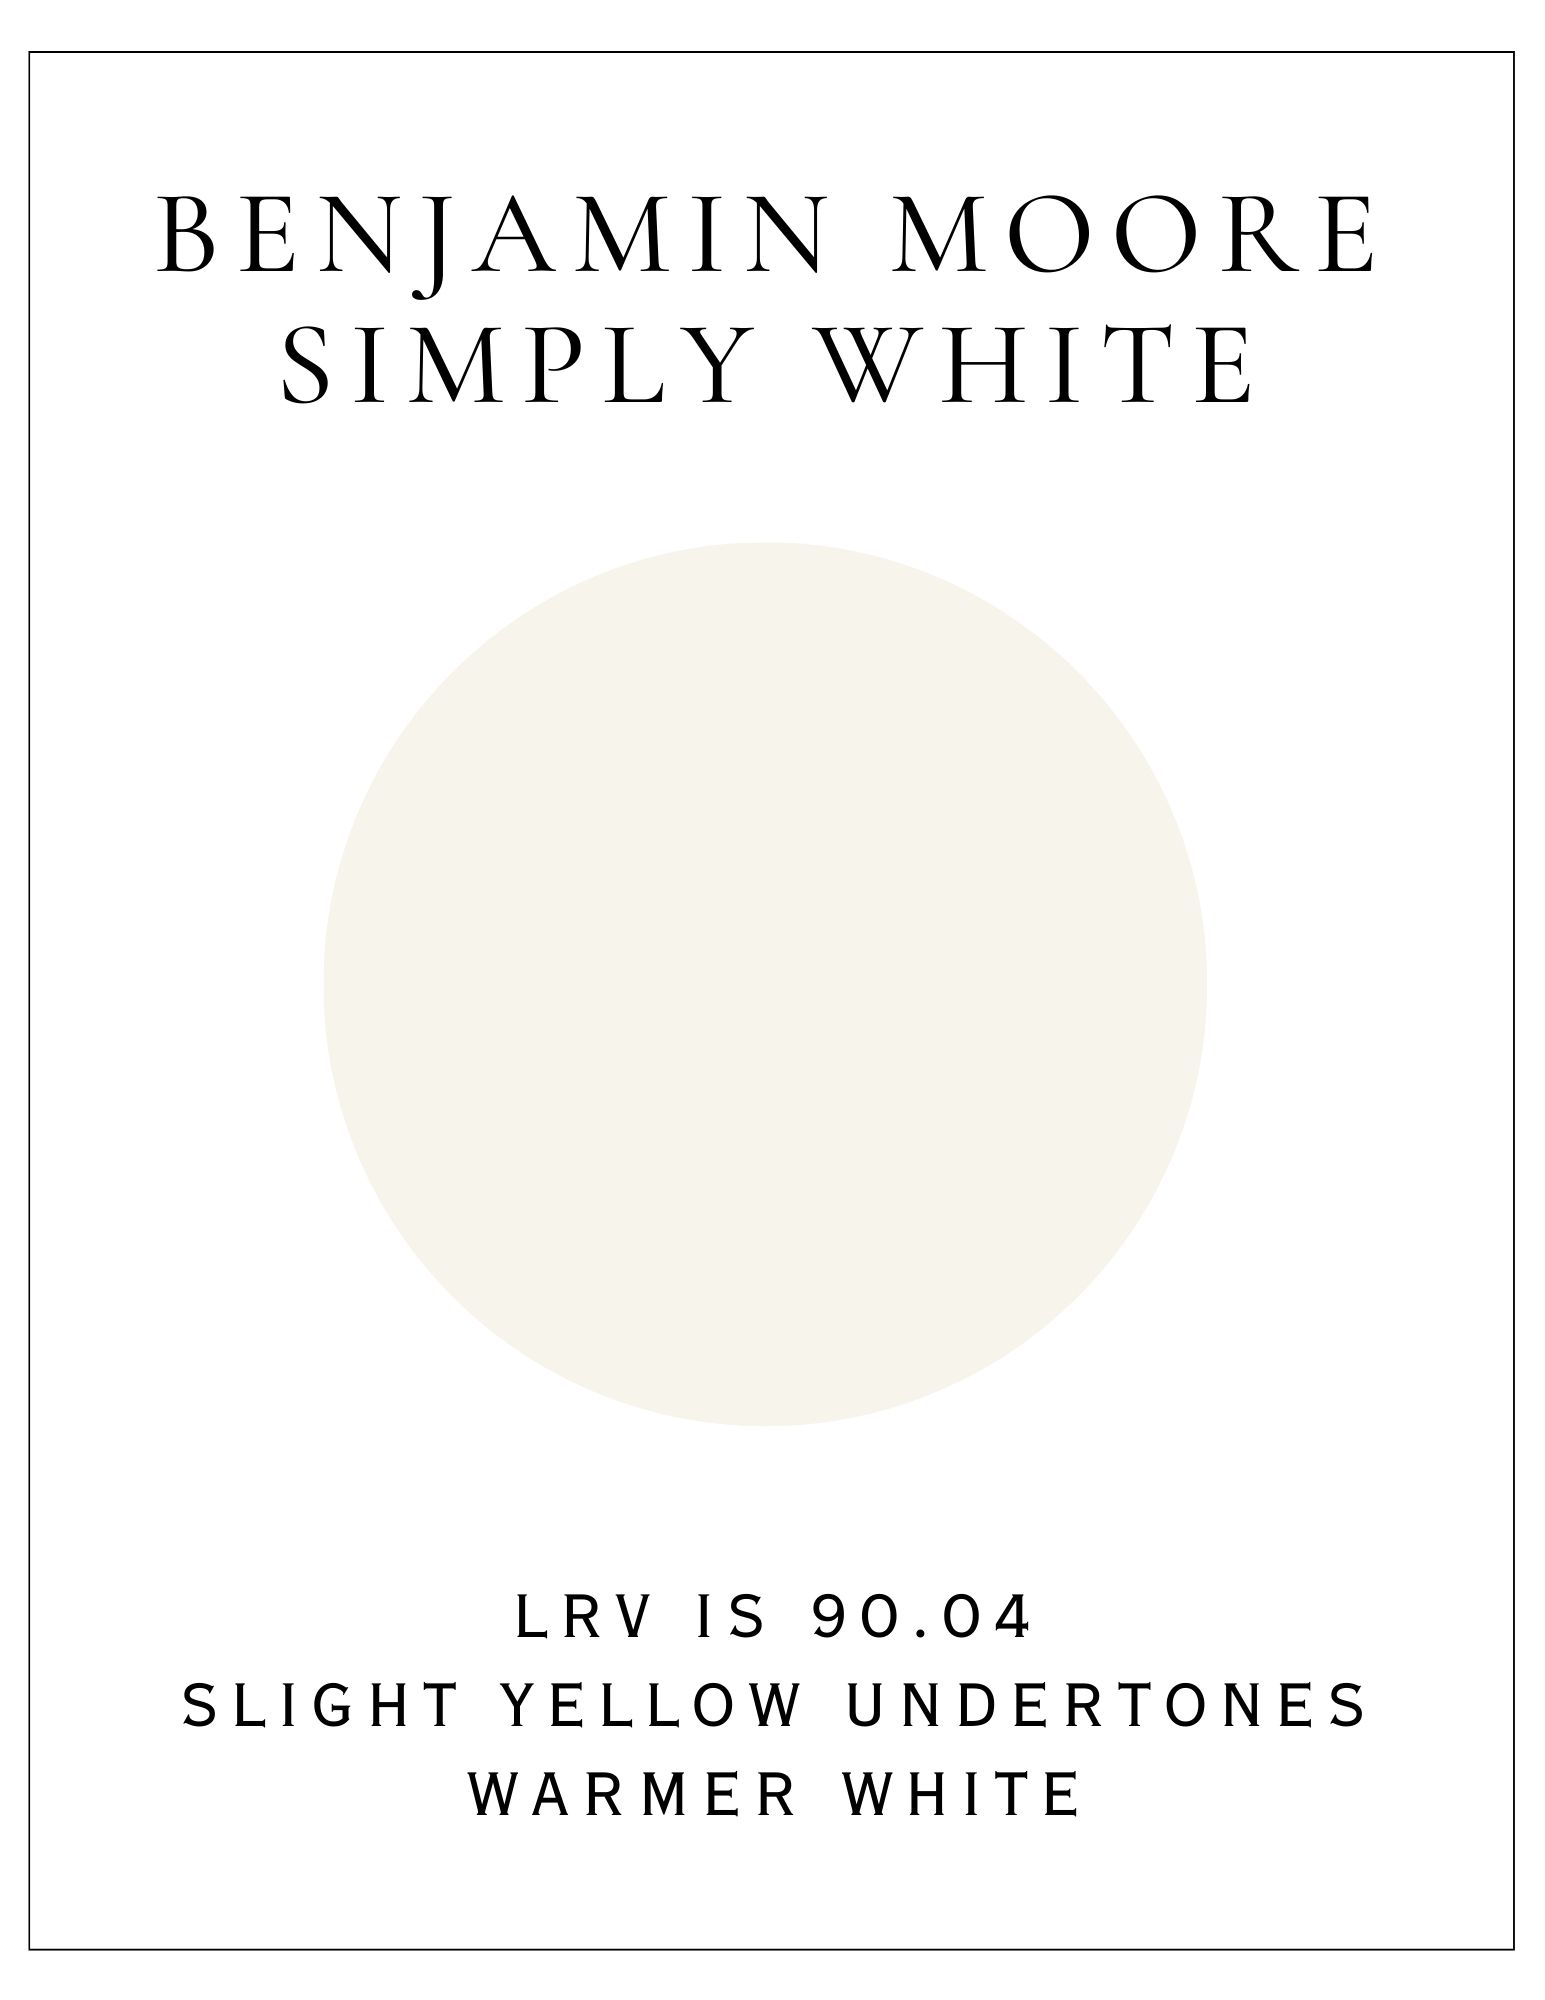 BM Simply White paint swatch